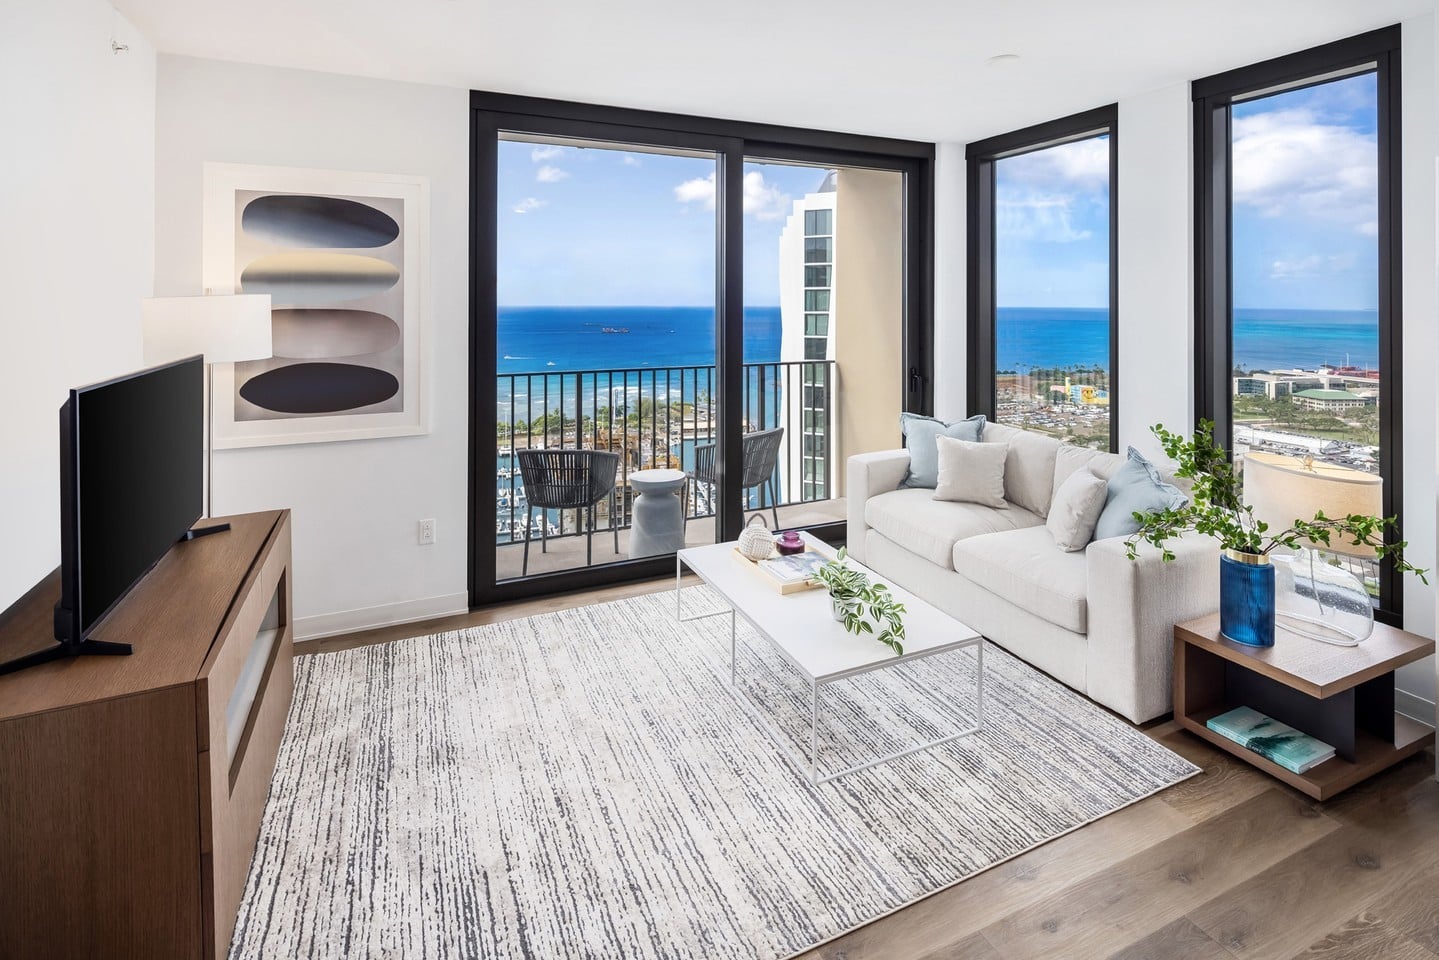 At ʻAʻaliʻi, floor-to-ceiling windows showcase sweeping views and the beauty of Hawai‘i. Learn more about these furnished, move-in ready residences at www.aaliiwardvillage.com.